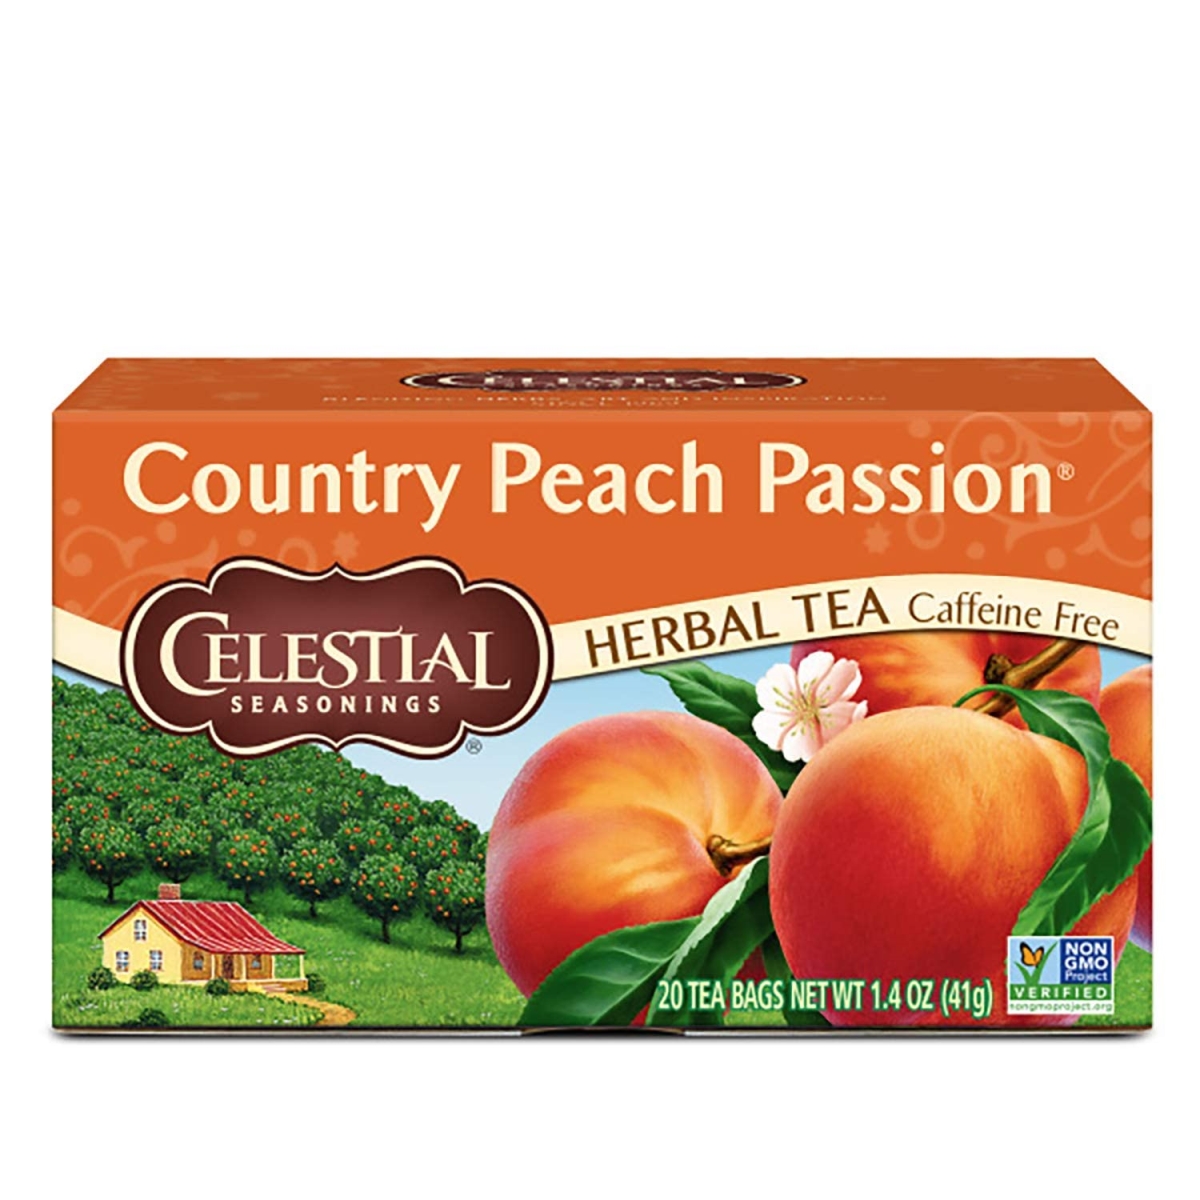 Picture of Celestial Season 2200595 Country Peach Passion Herbal Tea - Pack of 6 - 16 Bag